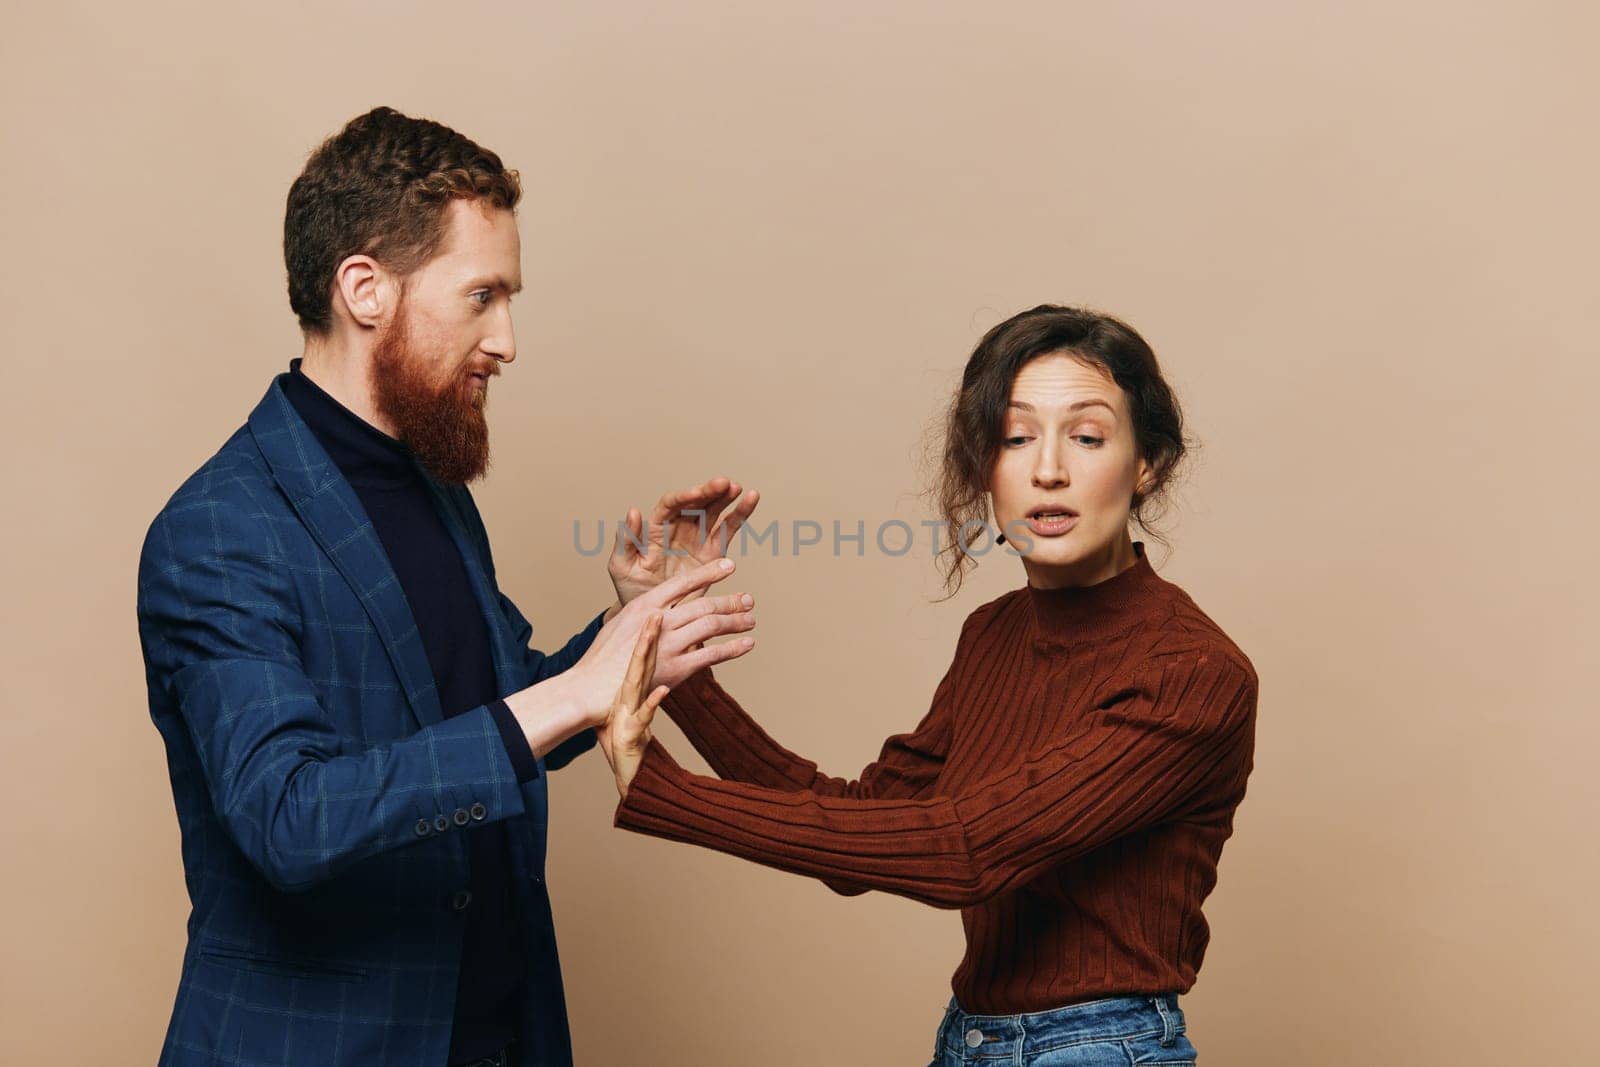 Man and woman couple in a relationship quarrel, yelling, psychological violence in the family, problems in a real relationship between people. High quality photo